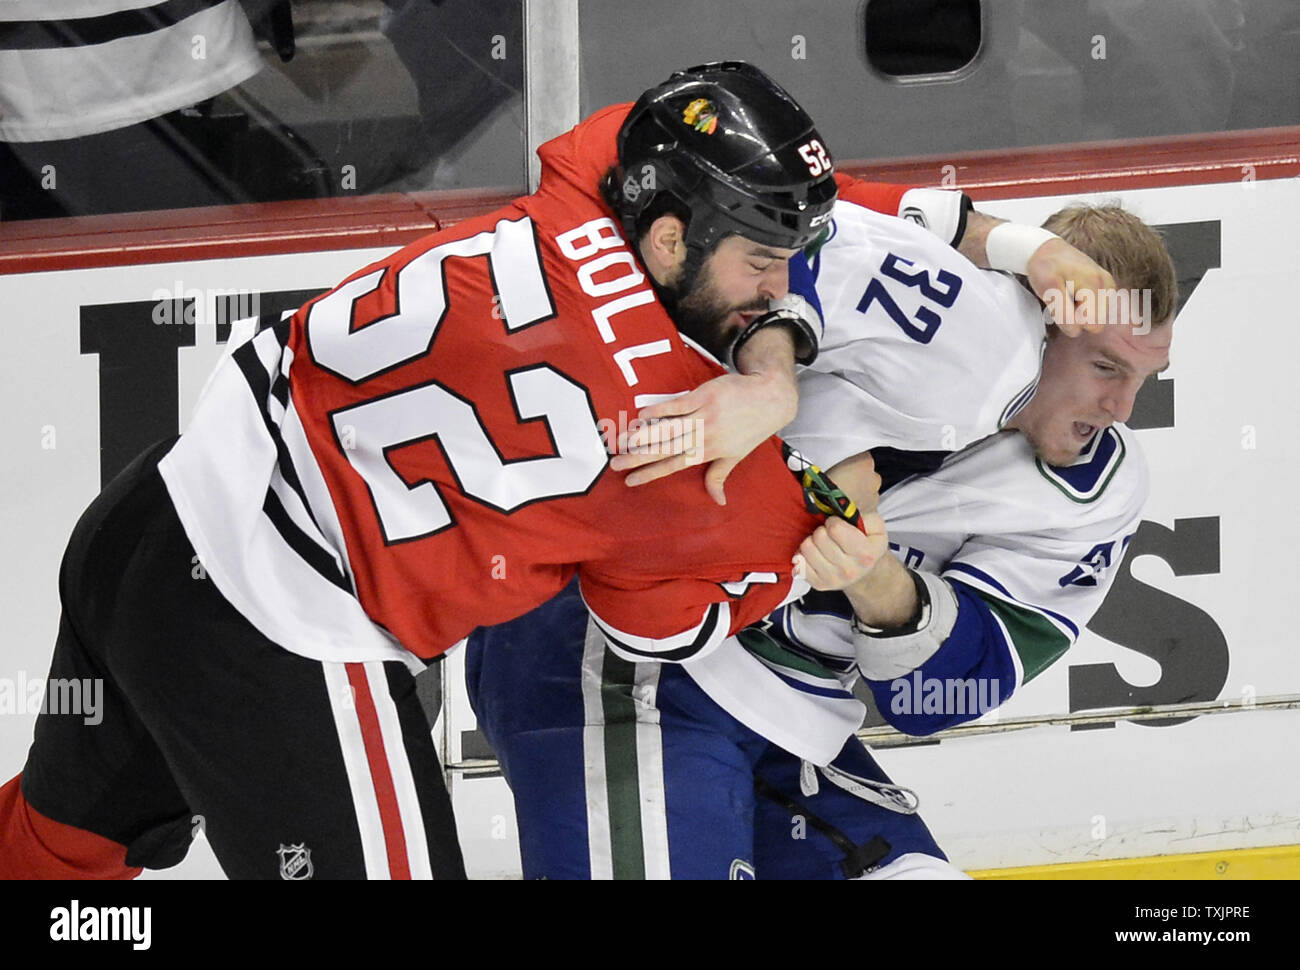 Chicago Blackhawks left wing Brandon Bollig (L) and Vancouver Canucks right wing Dale Weise fight during the first period at the United Center in Chicago on February 19, 2013.     UPI/Brian Kersey Stock Photo